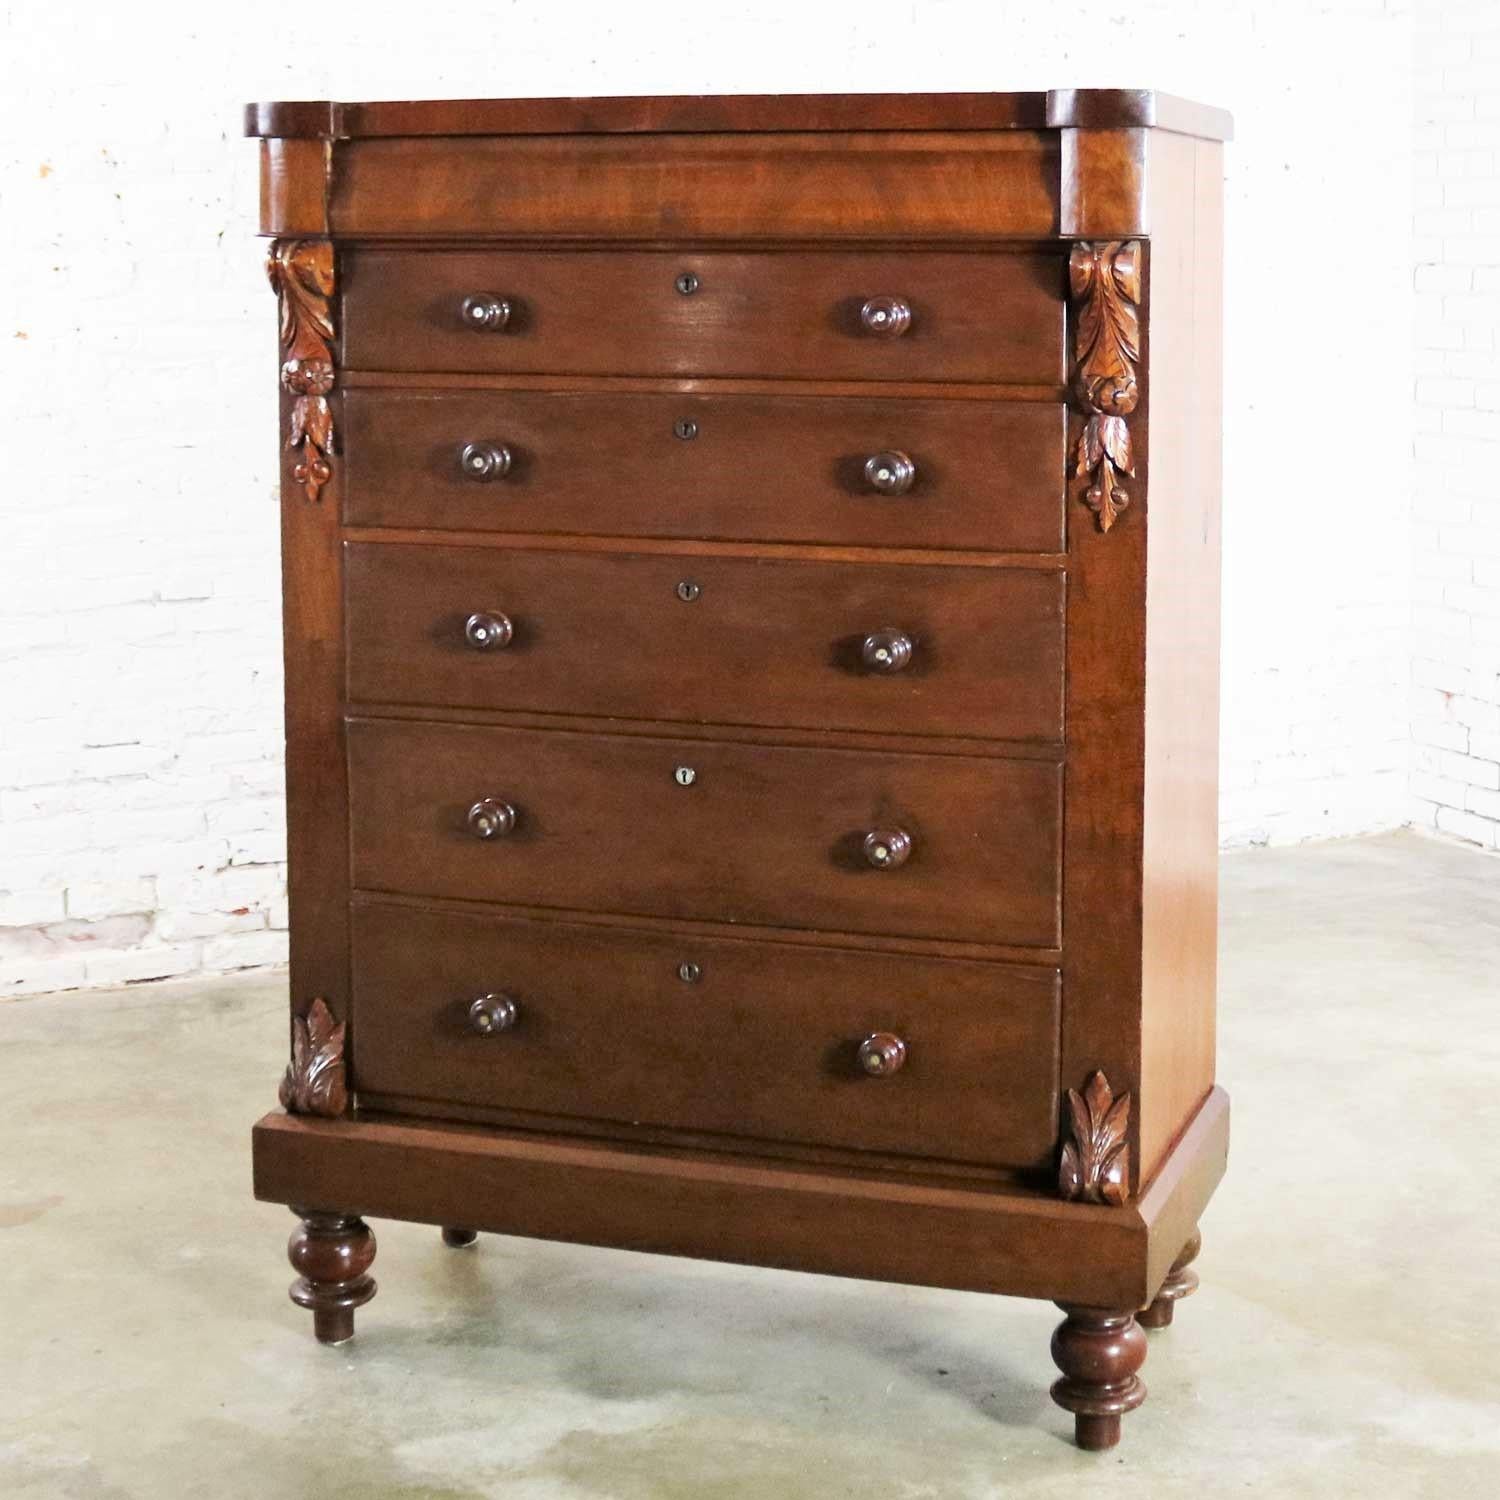 Handsome, very useful, and very tall antique Edwardian chest of drawers in pine with burl wood veneer front, most likely walnut; mother of pearl inlay on knobs; and carved acanthus leaves. It is in good antique condition with lots of patina. It